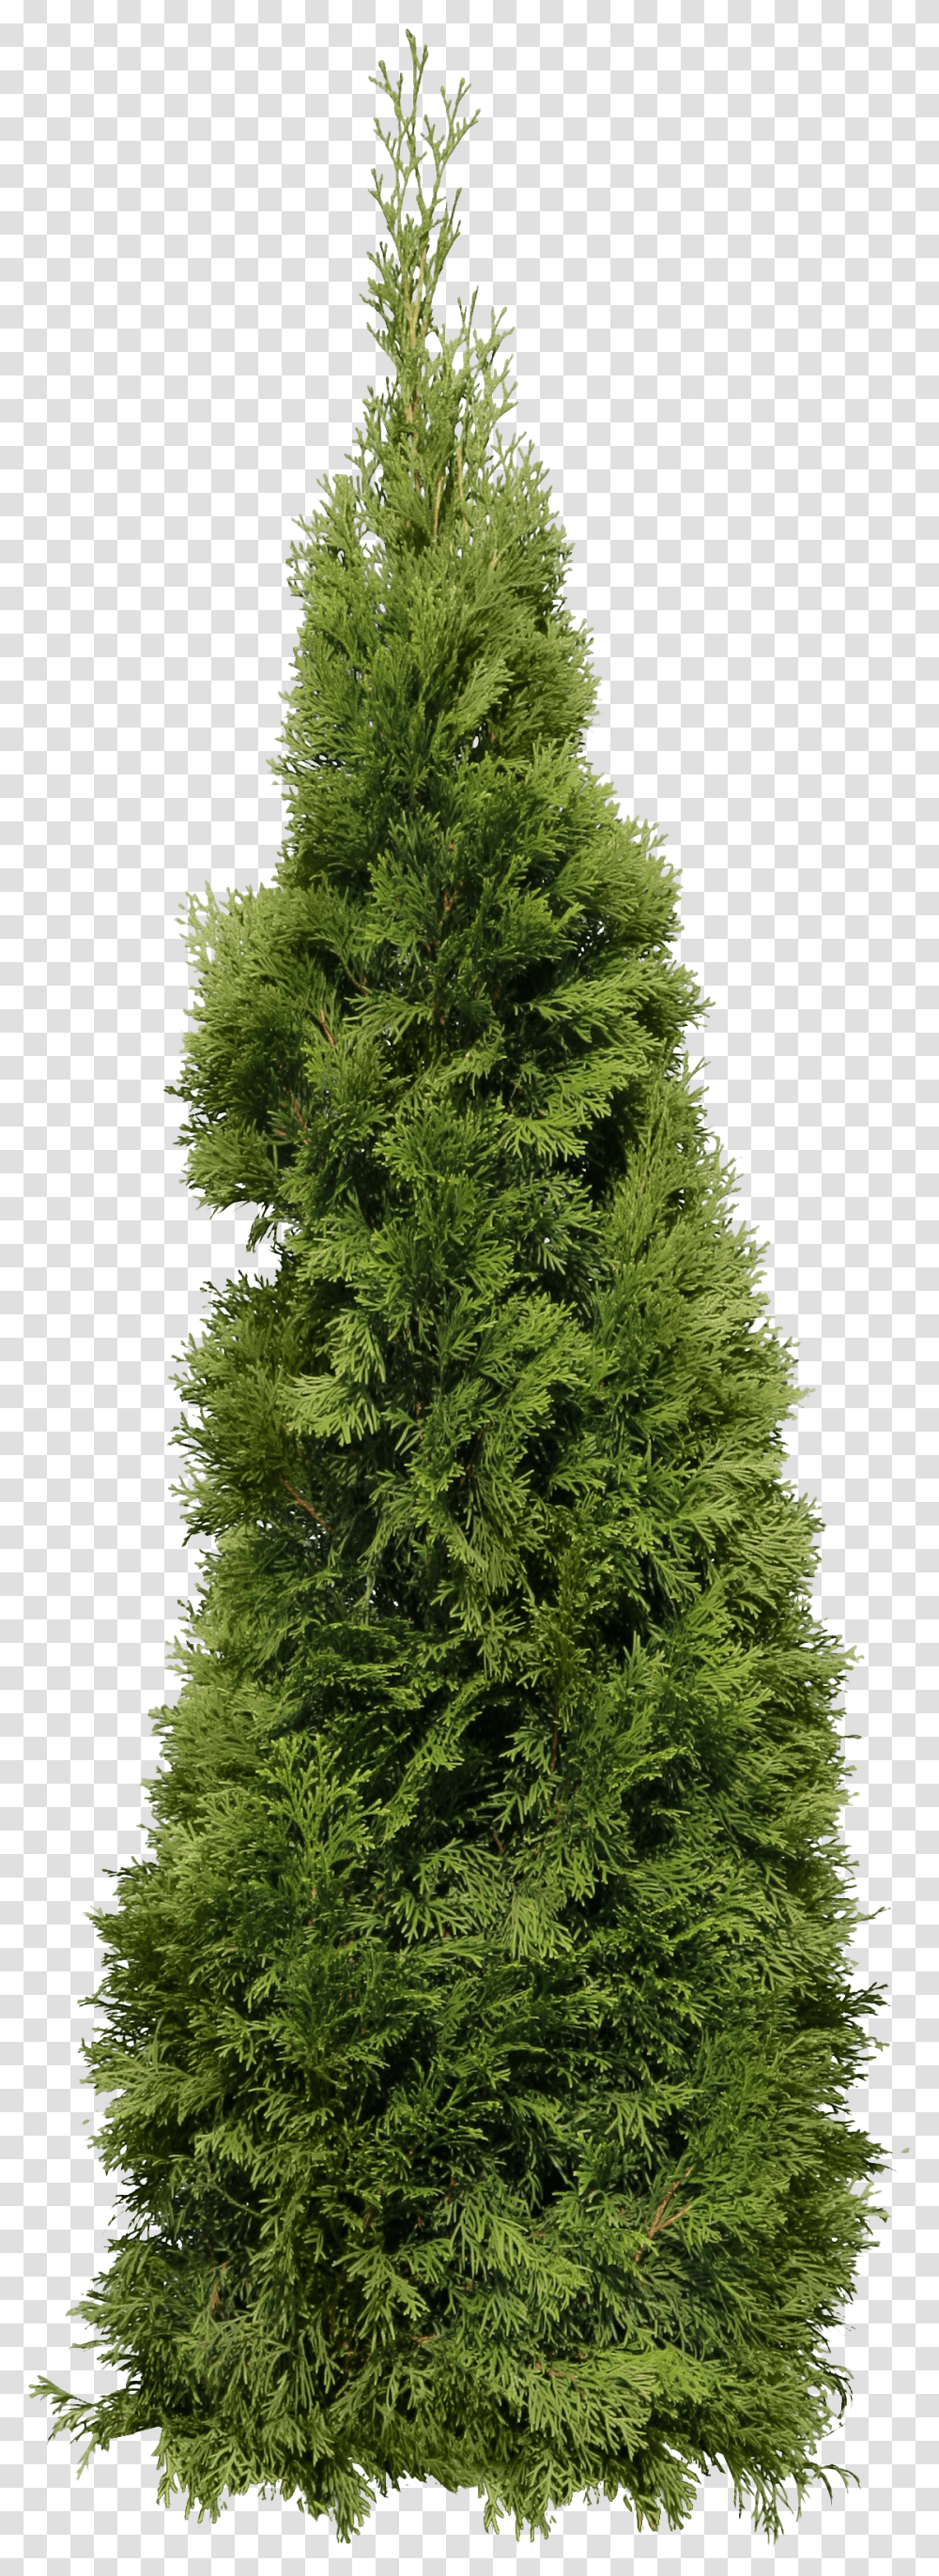 Green Big Fir Tree Image Matte Painting Images Hd In Transparent Png